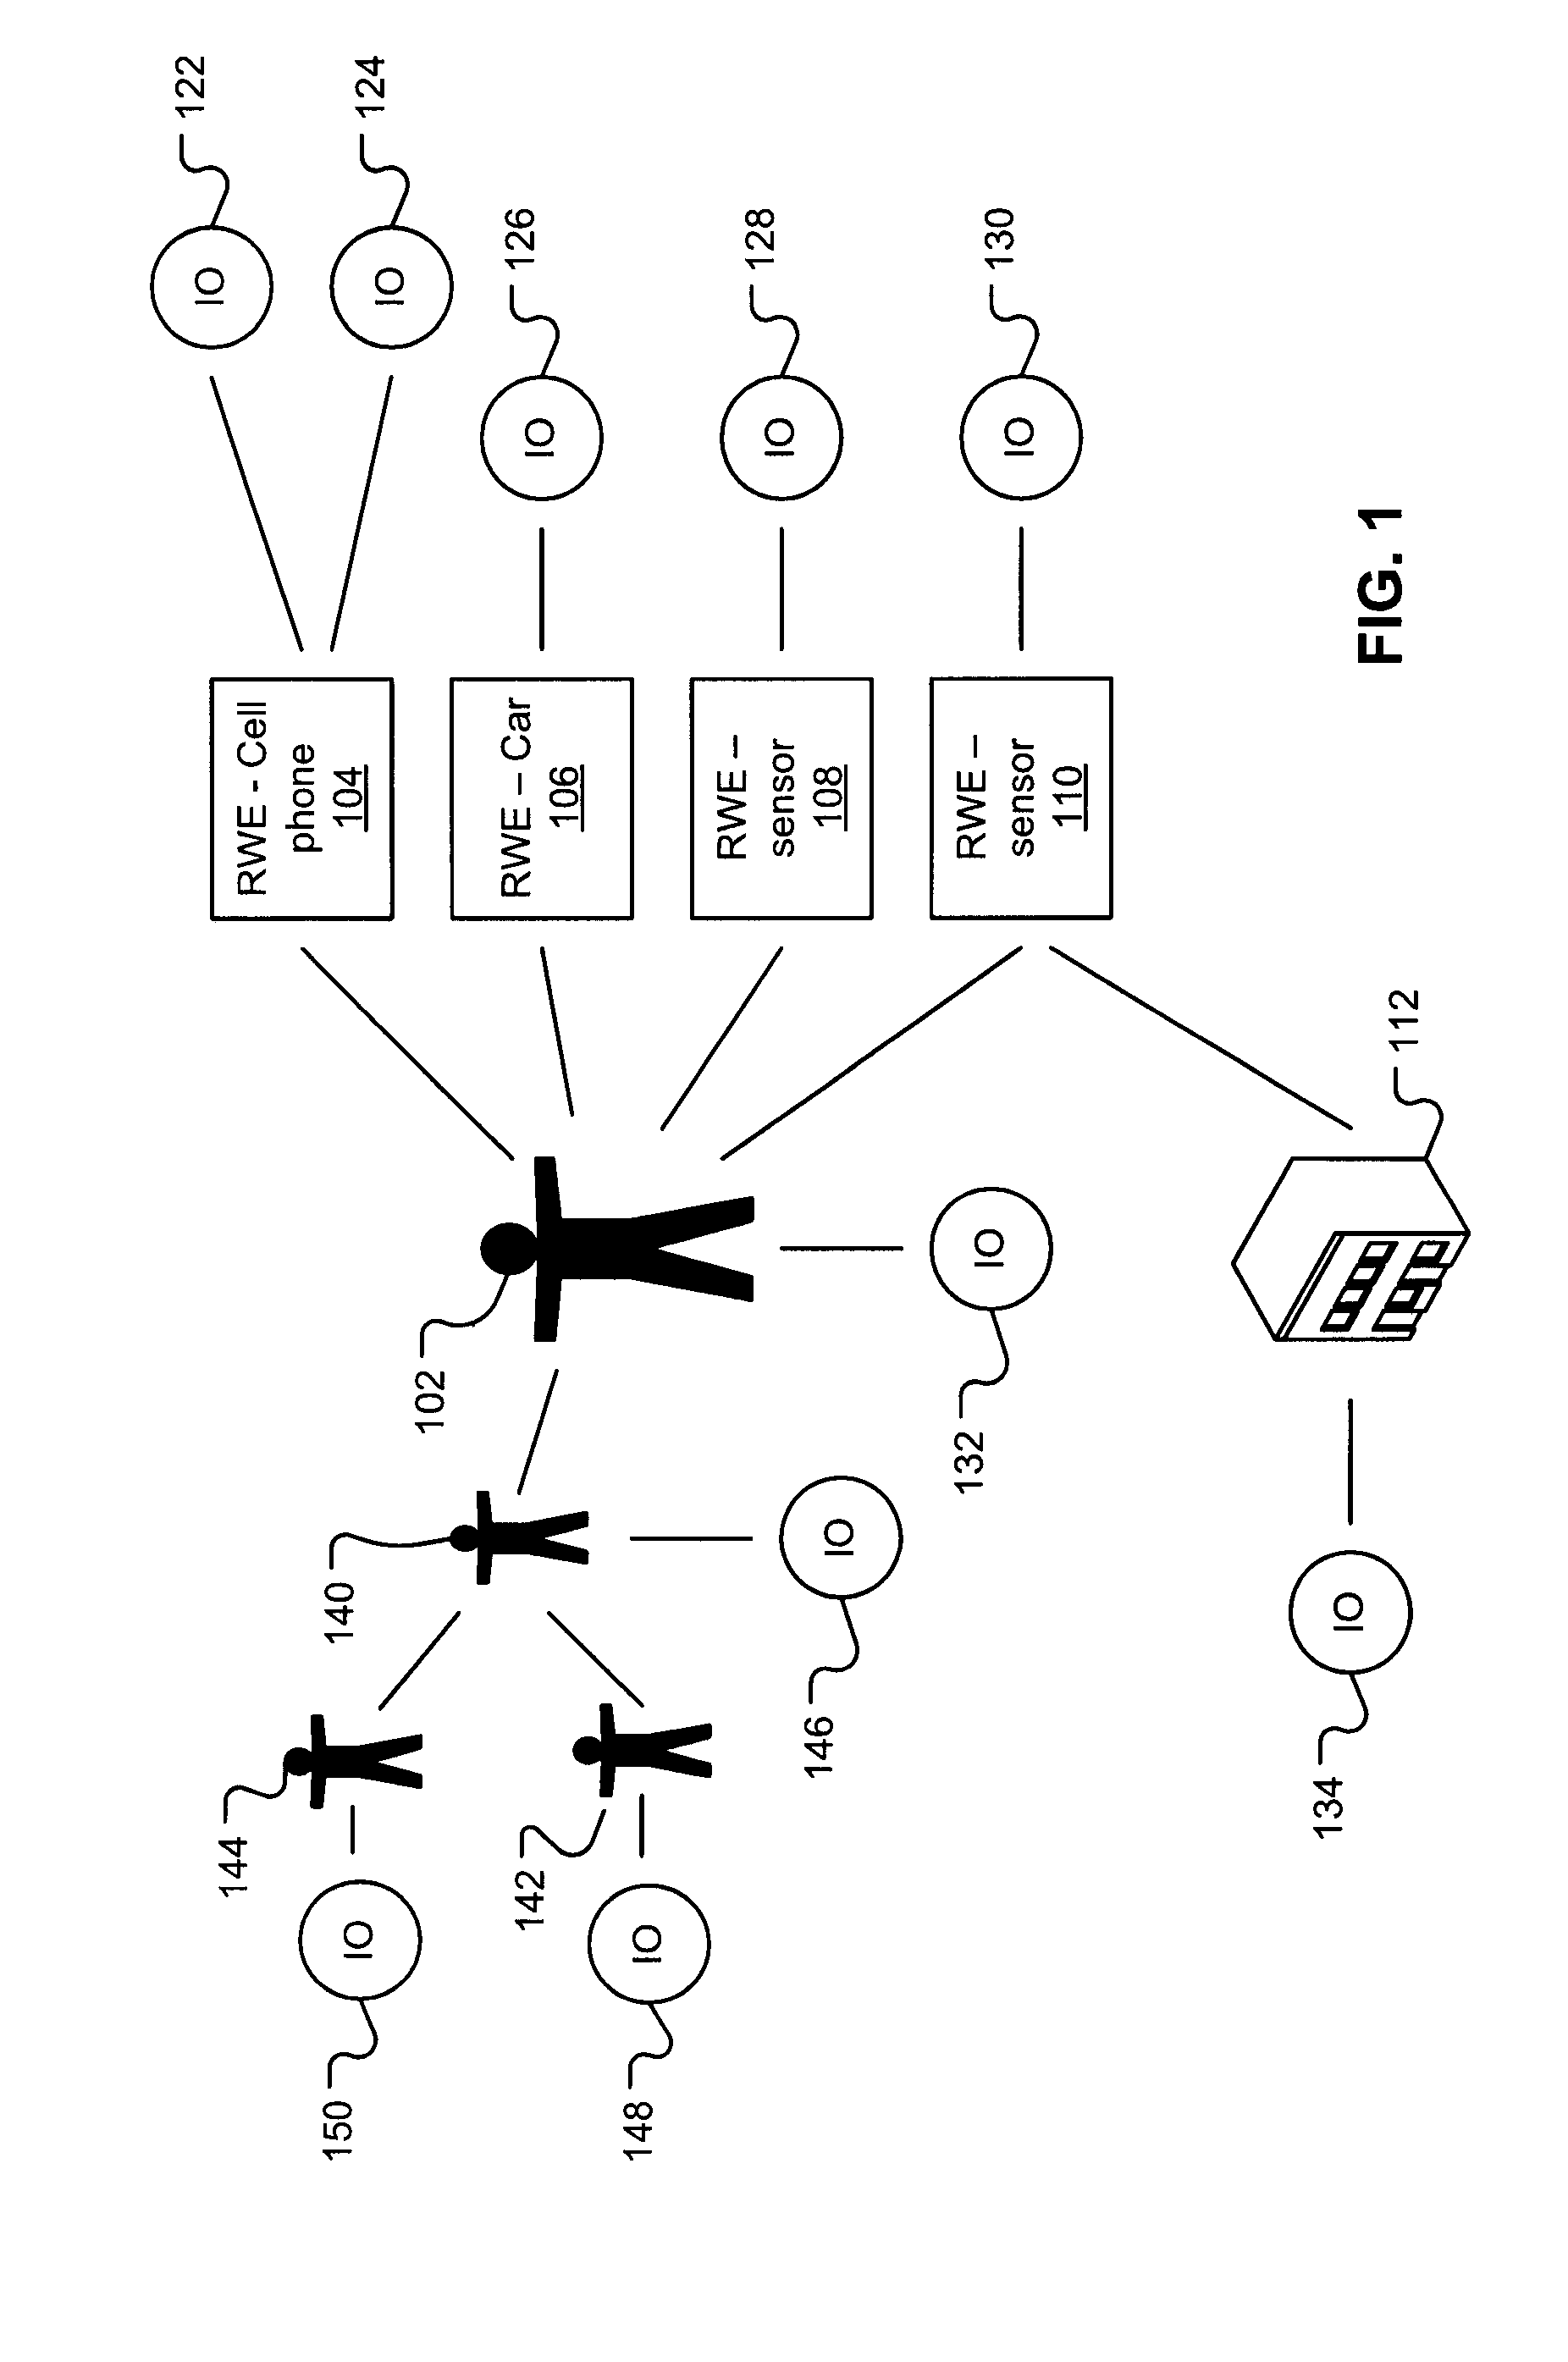 System and method for context based query augmentation